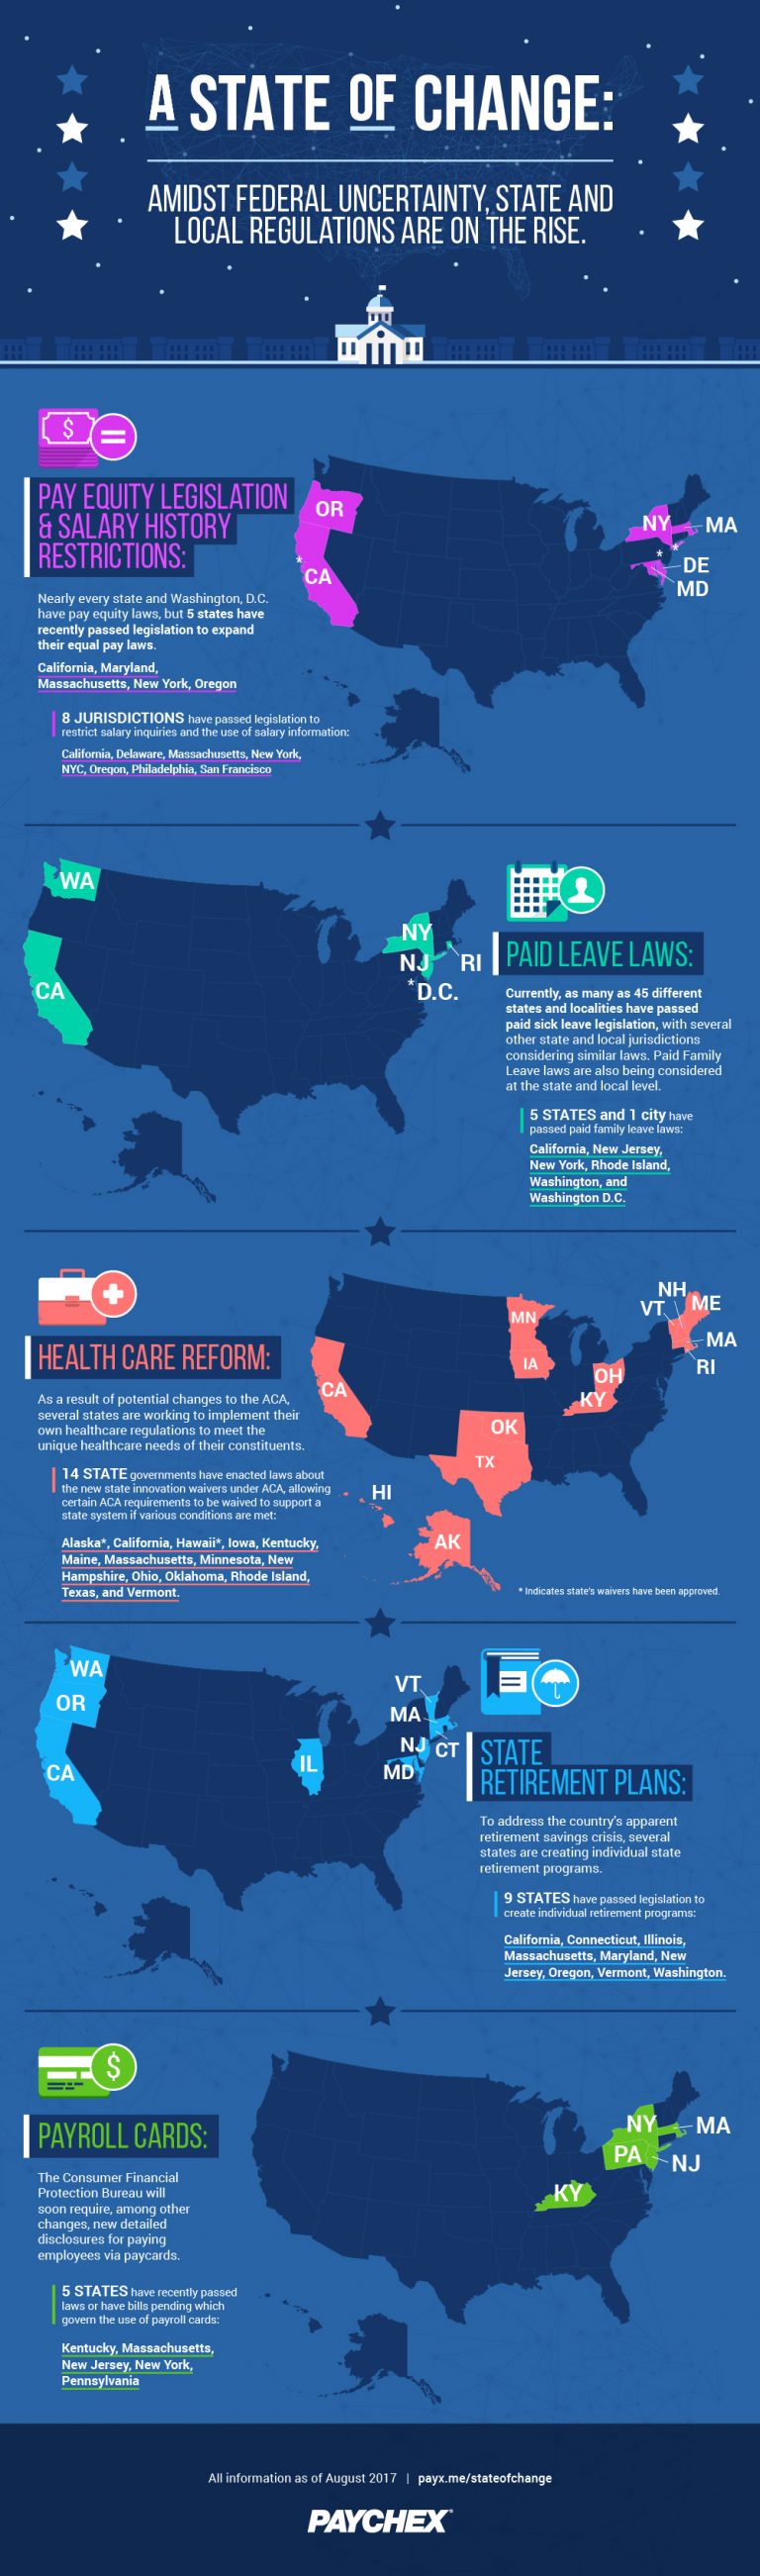 state of change infographic 1  59a6d804e8700